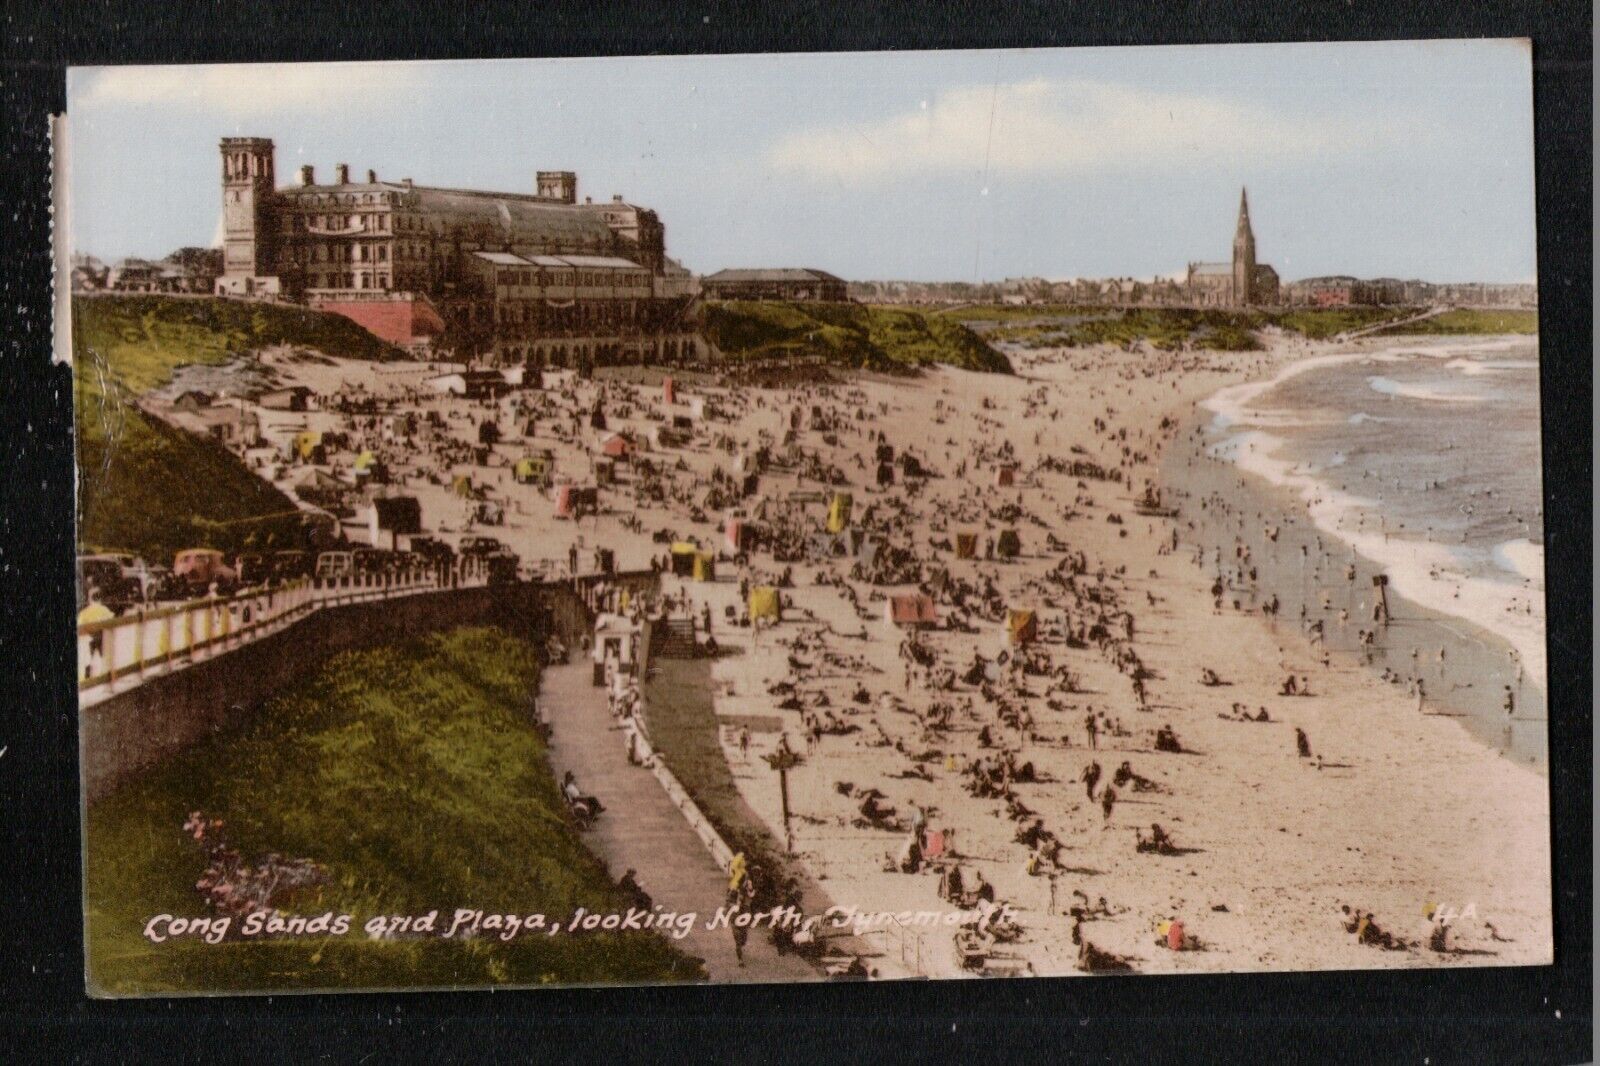 House Clearance - Long Sands and Plaza Looking North Tynemouth 1960 Service ~ Northumberland